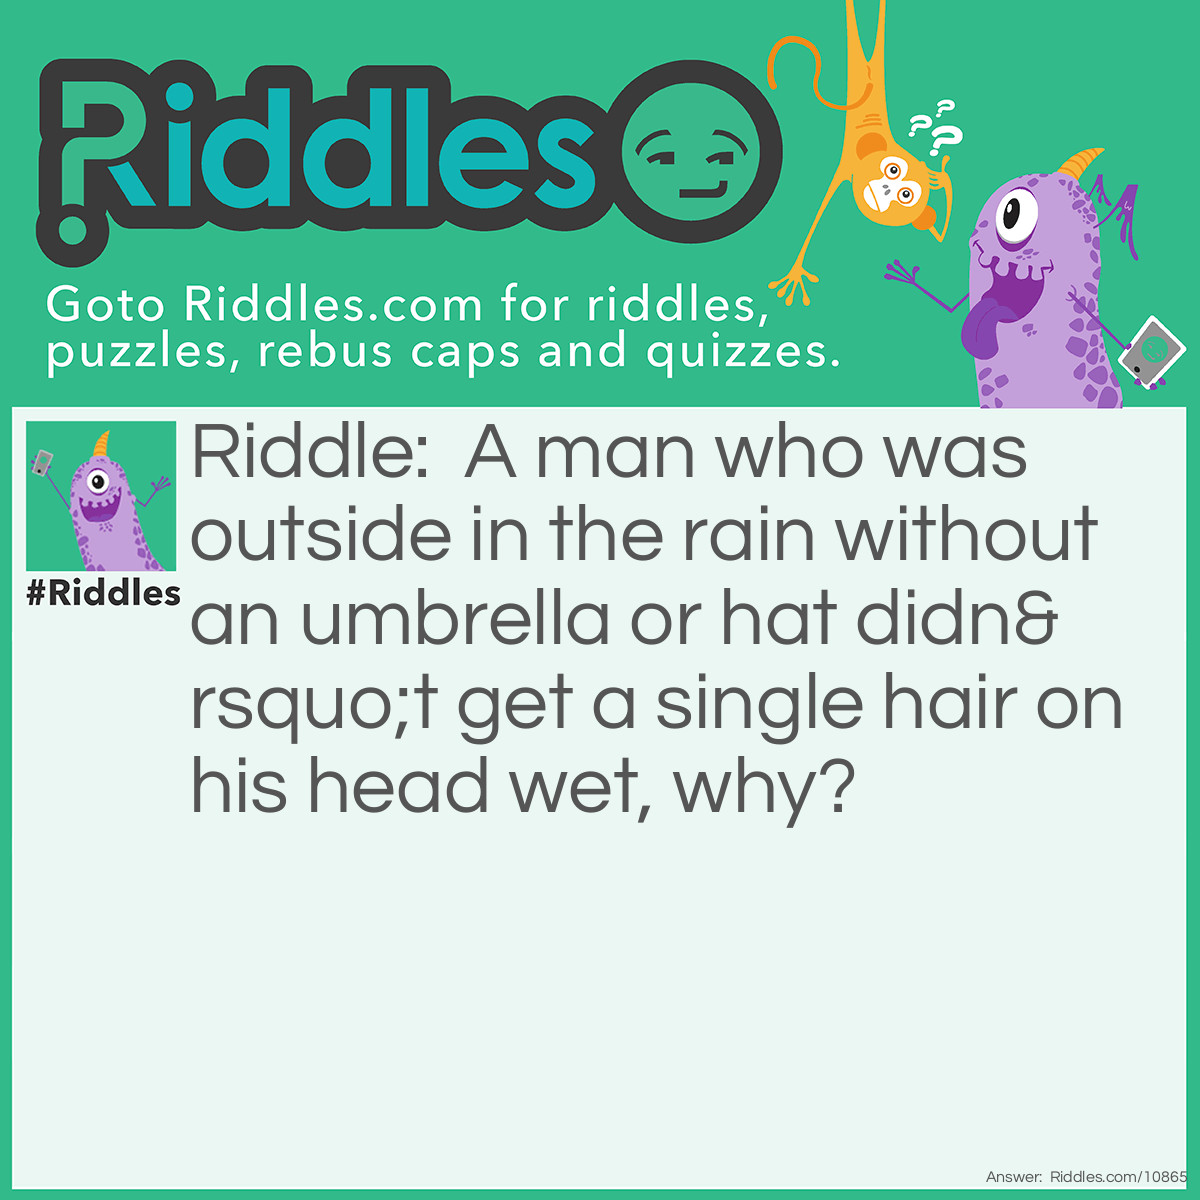 Riddle: A man who was outside in the rain without an umbrella or hat didn’t get a single hair on his head wet, why? Answer: He was bald.